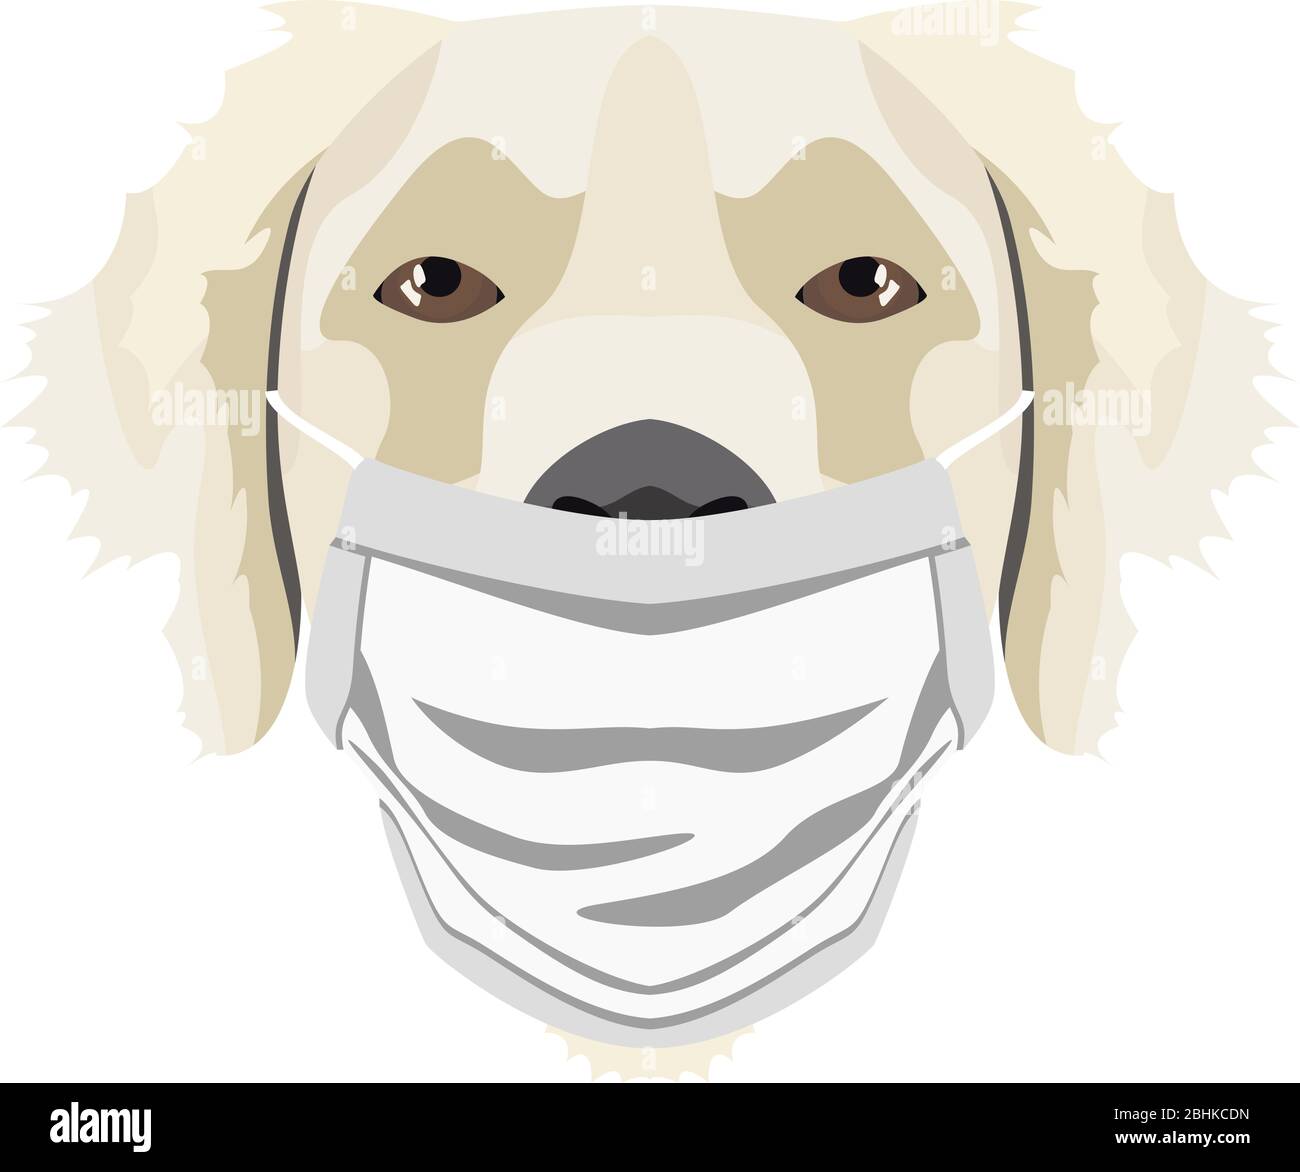 Illustration of a golden retriever with respirator. At this time of the pandemic, the design is a nice graphic for fans of dogs. Stock Vector